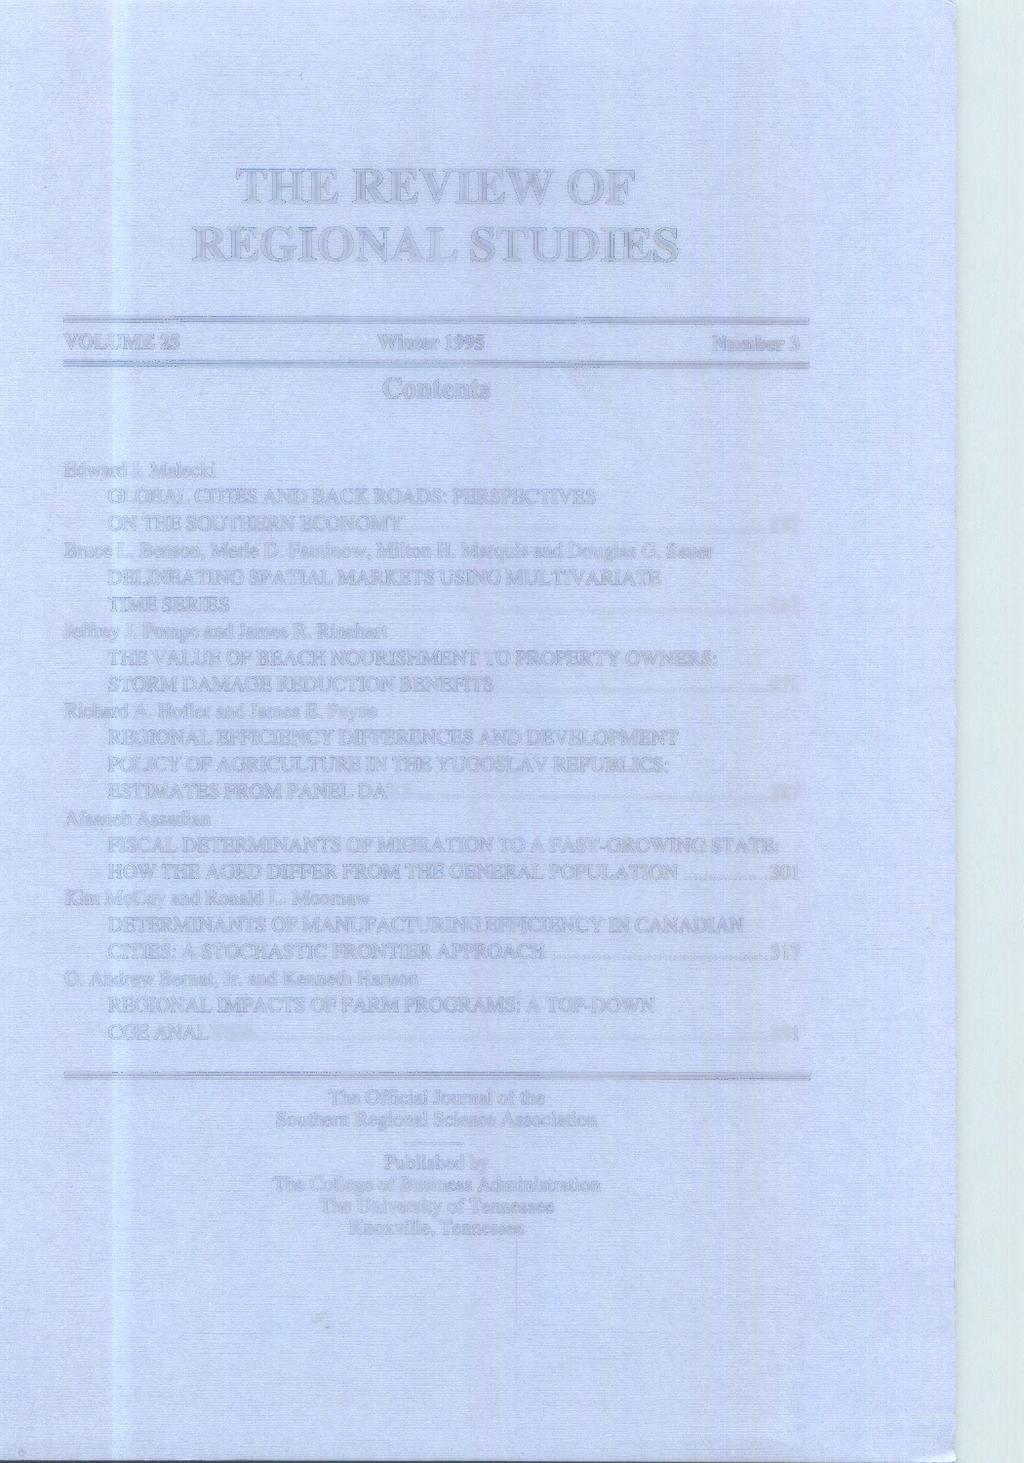 THE REVIEW OF REGIONAL STUDIES VOLUME25 Winter 1995 Contents Number3 Edward J. Malecki GLOBAL CITIES AND BACK ROADS: PERSPECTIVES ON THE SOUTHERN ECONOMY... 237 Bruce L. Benson, Merle D.